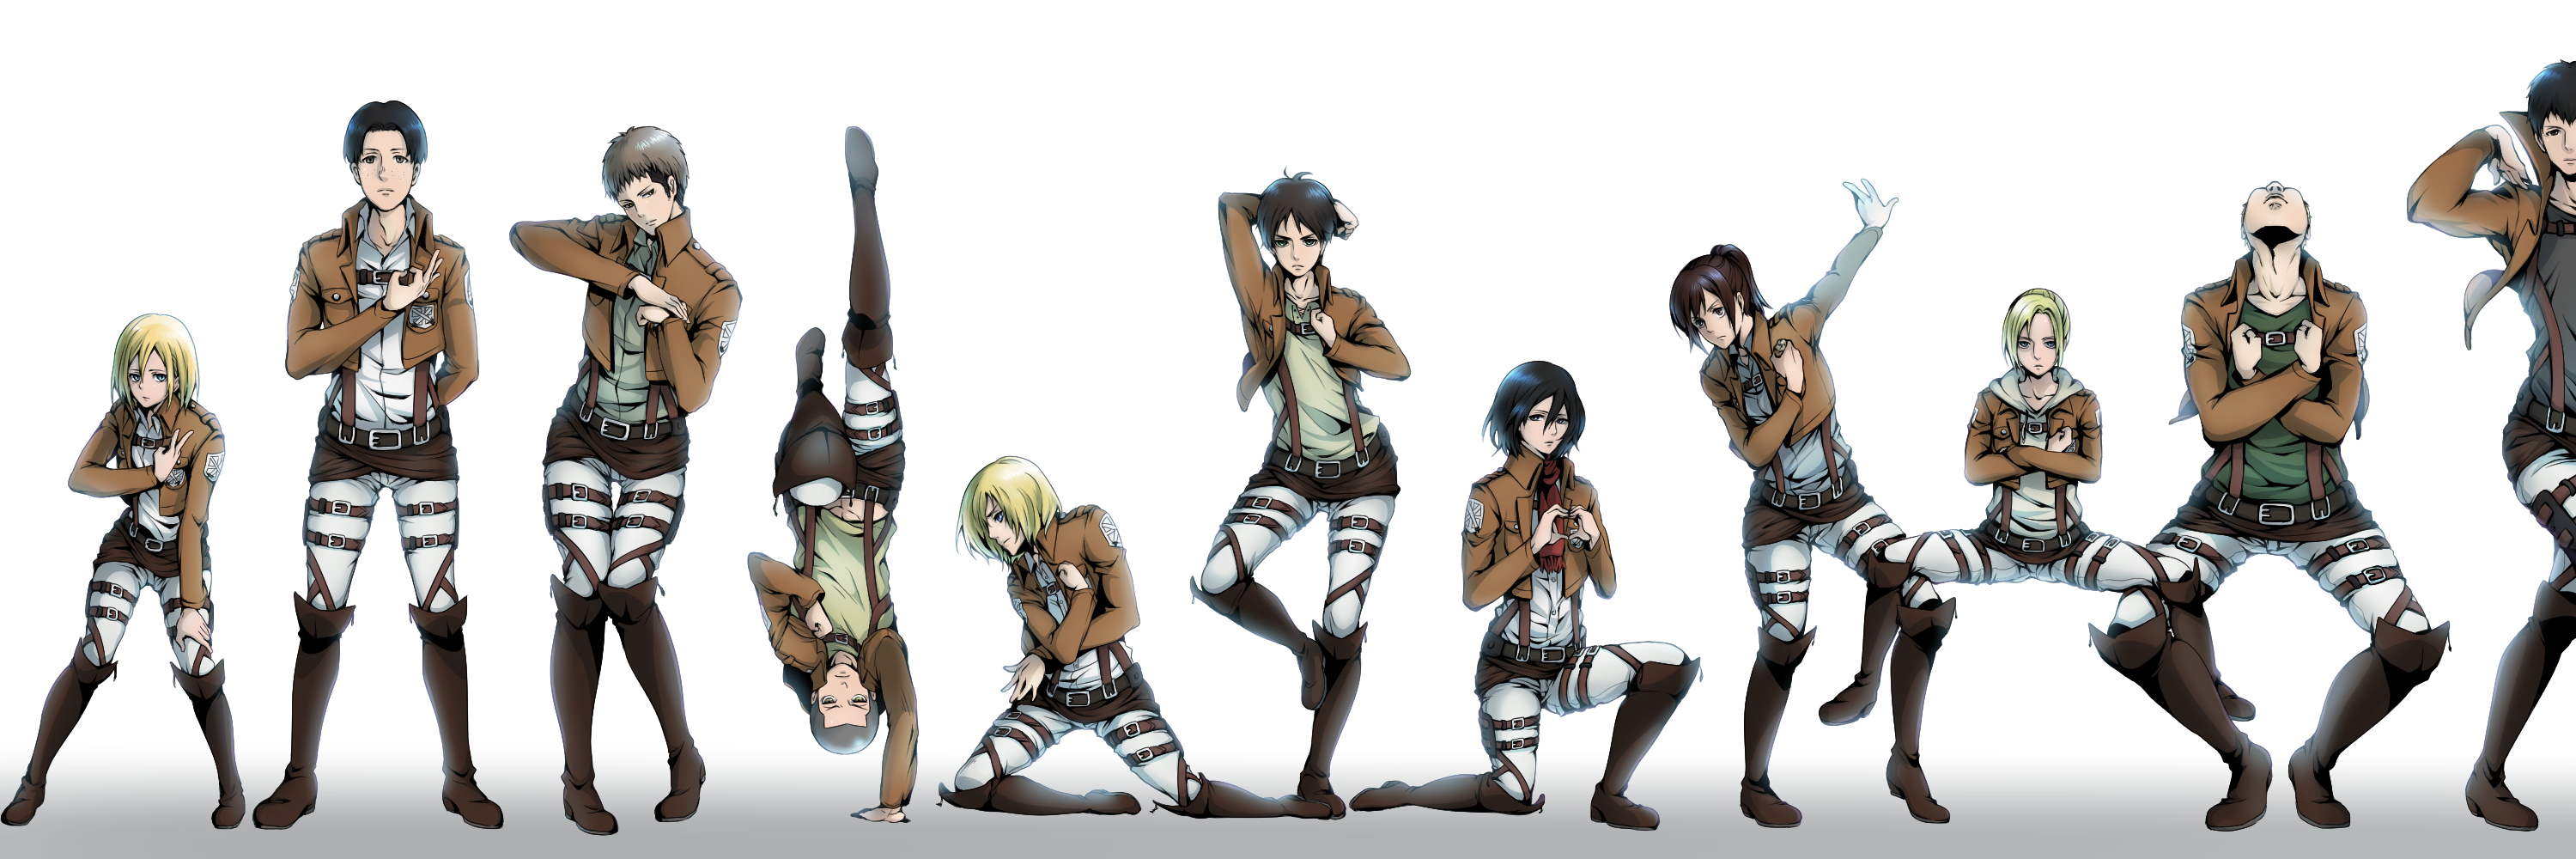 Attack on Titan characters doing funny poses